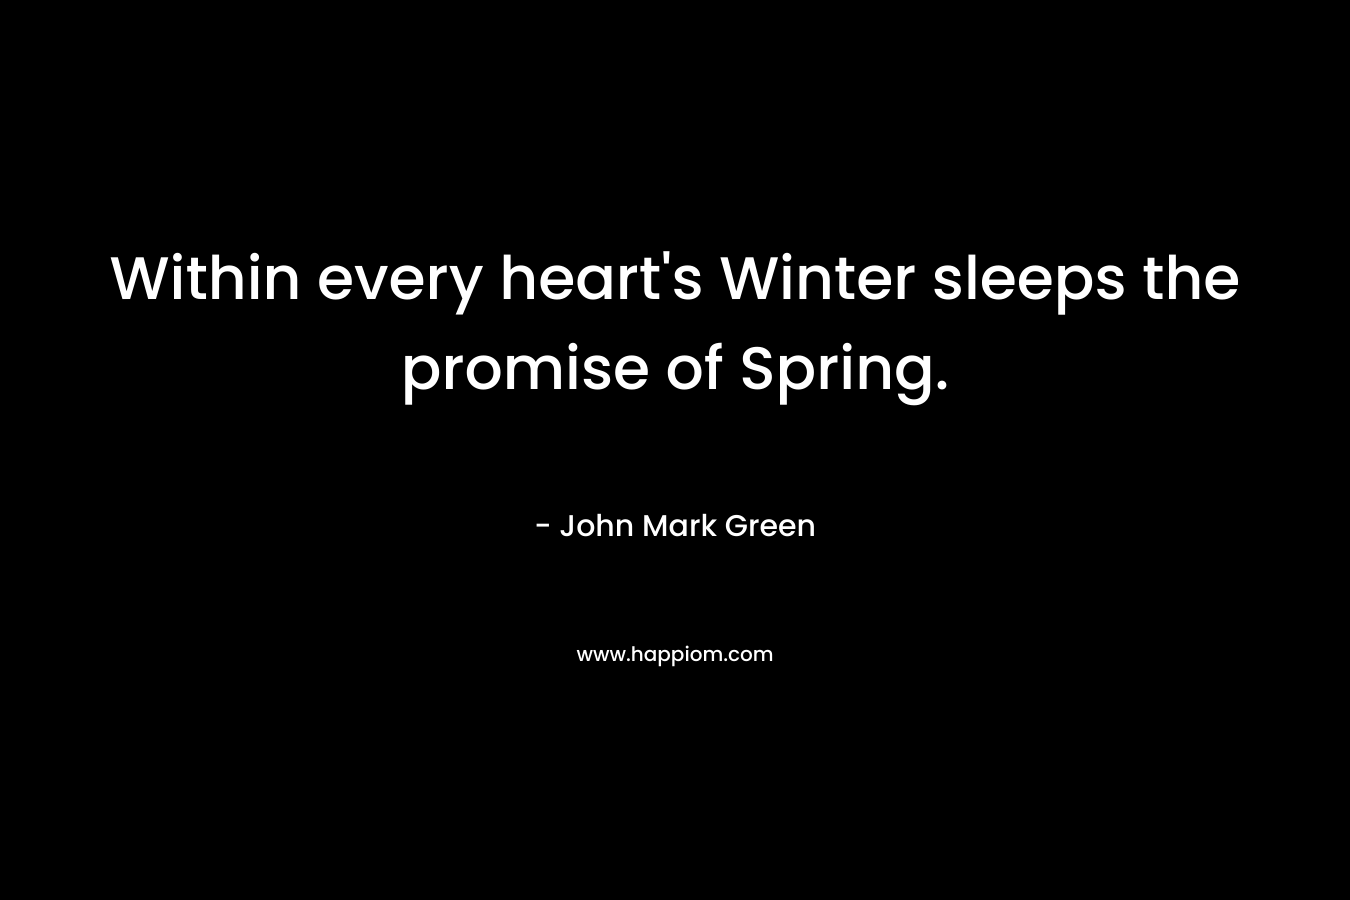 Within every heart's Winter sleeps the promise of Spring.